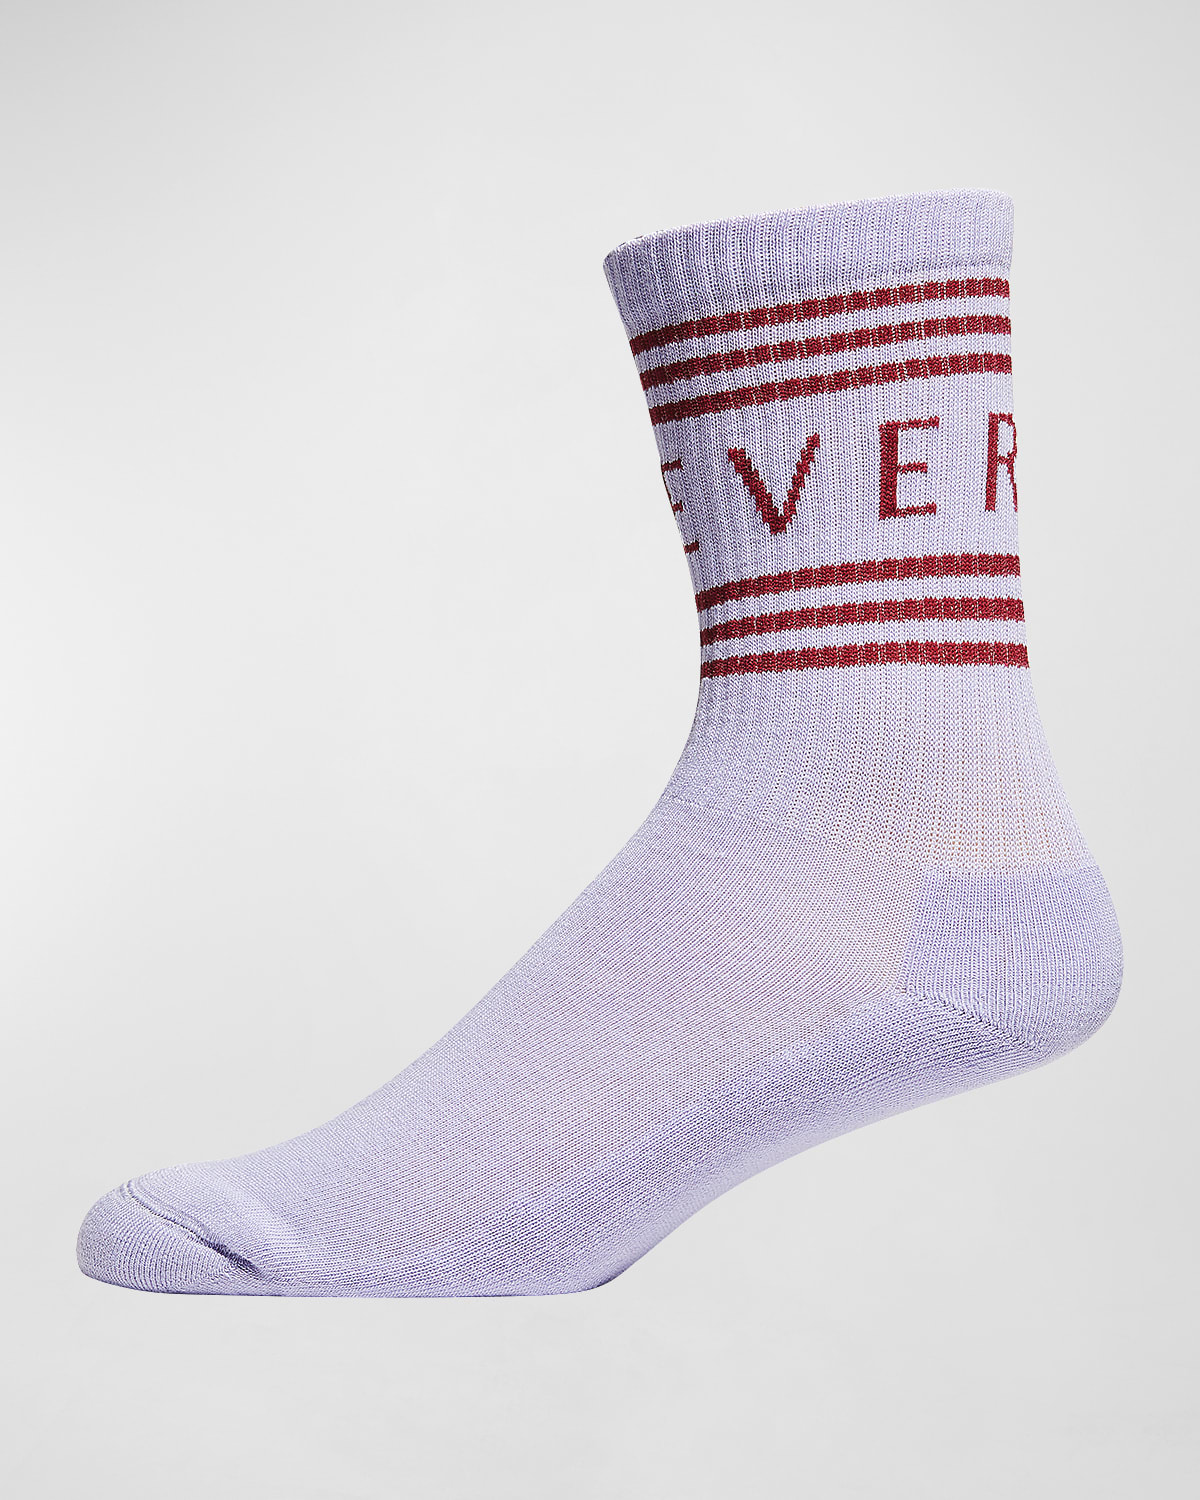 Versace Men's Athletic Band Socks In Orchird Bordeaux